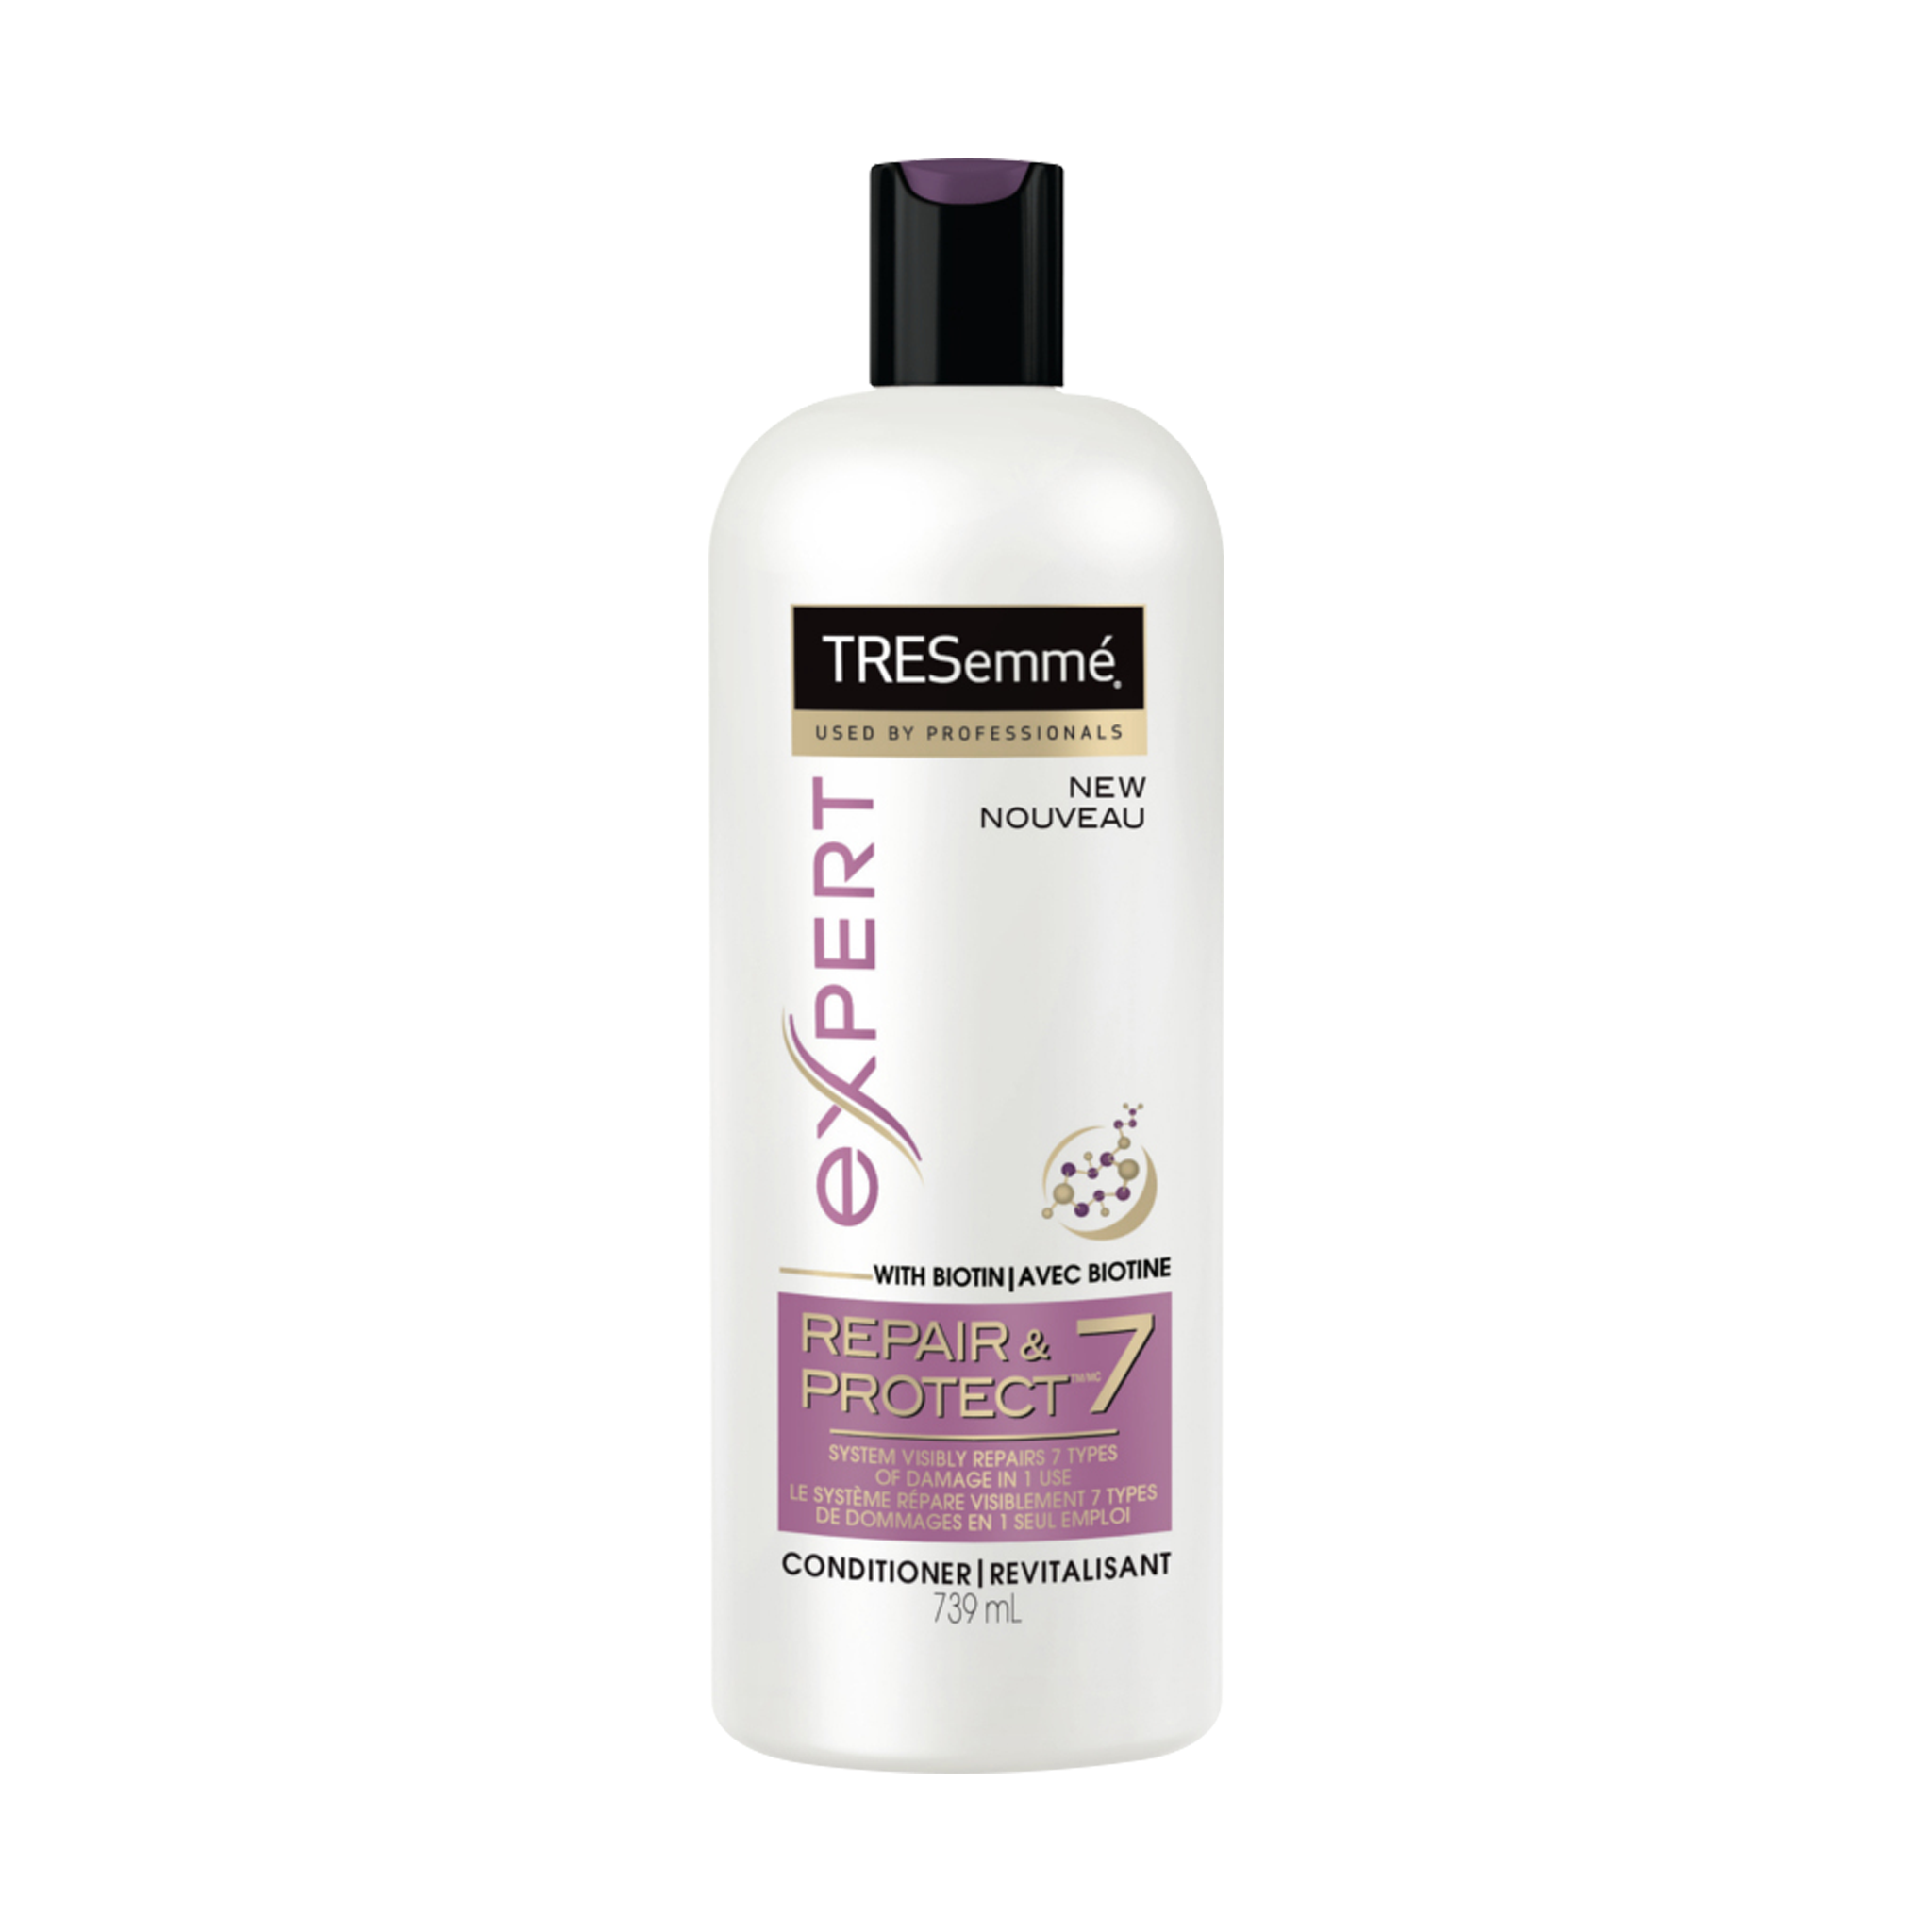 Tresemme Repair and Protect 7 Conditioner